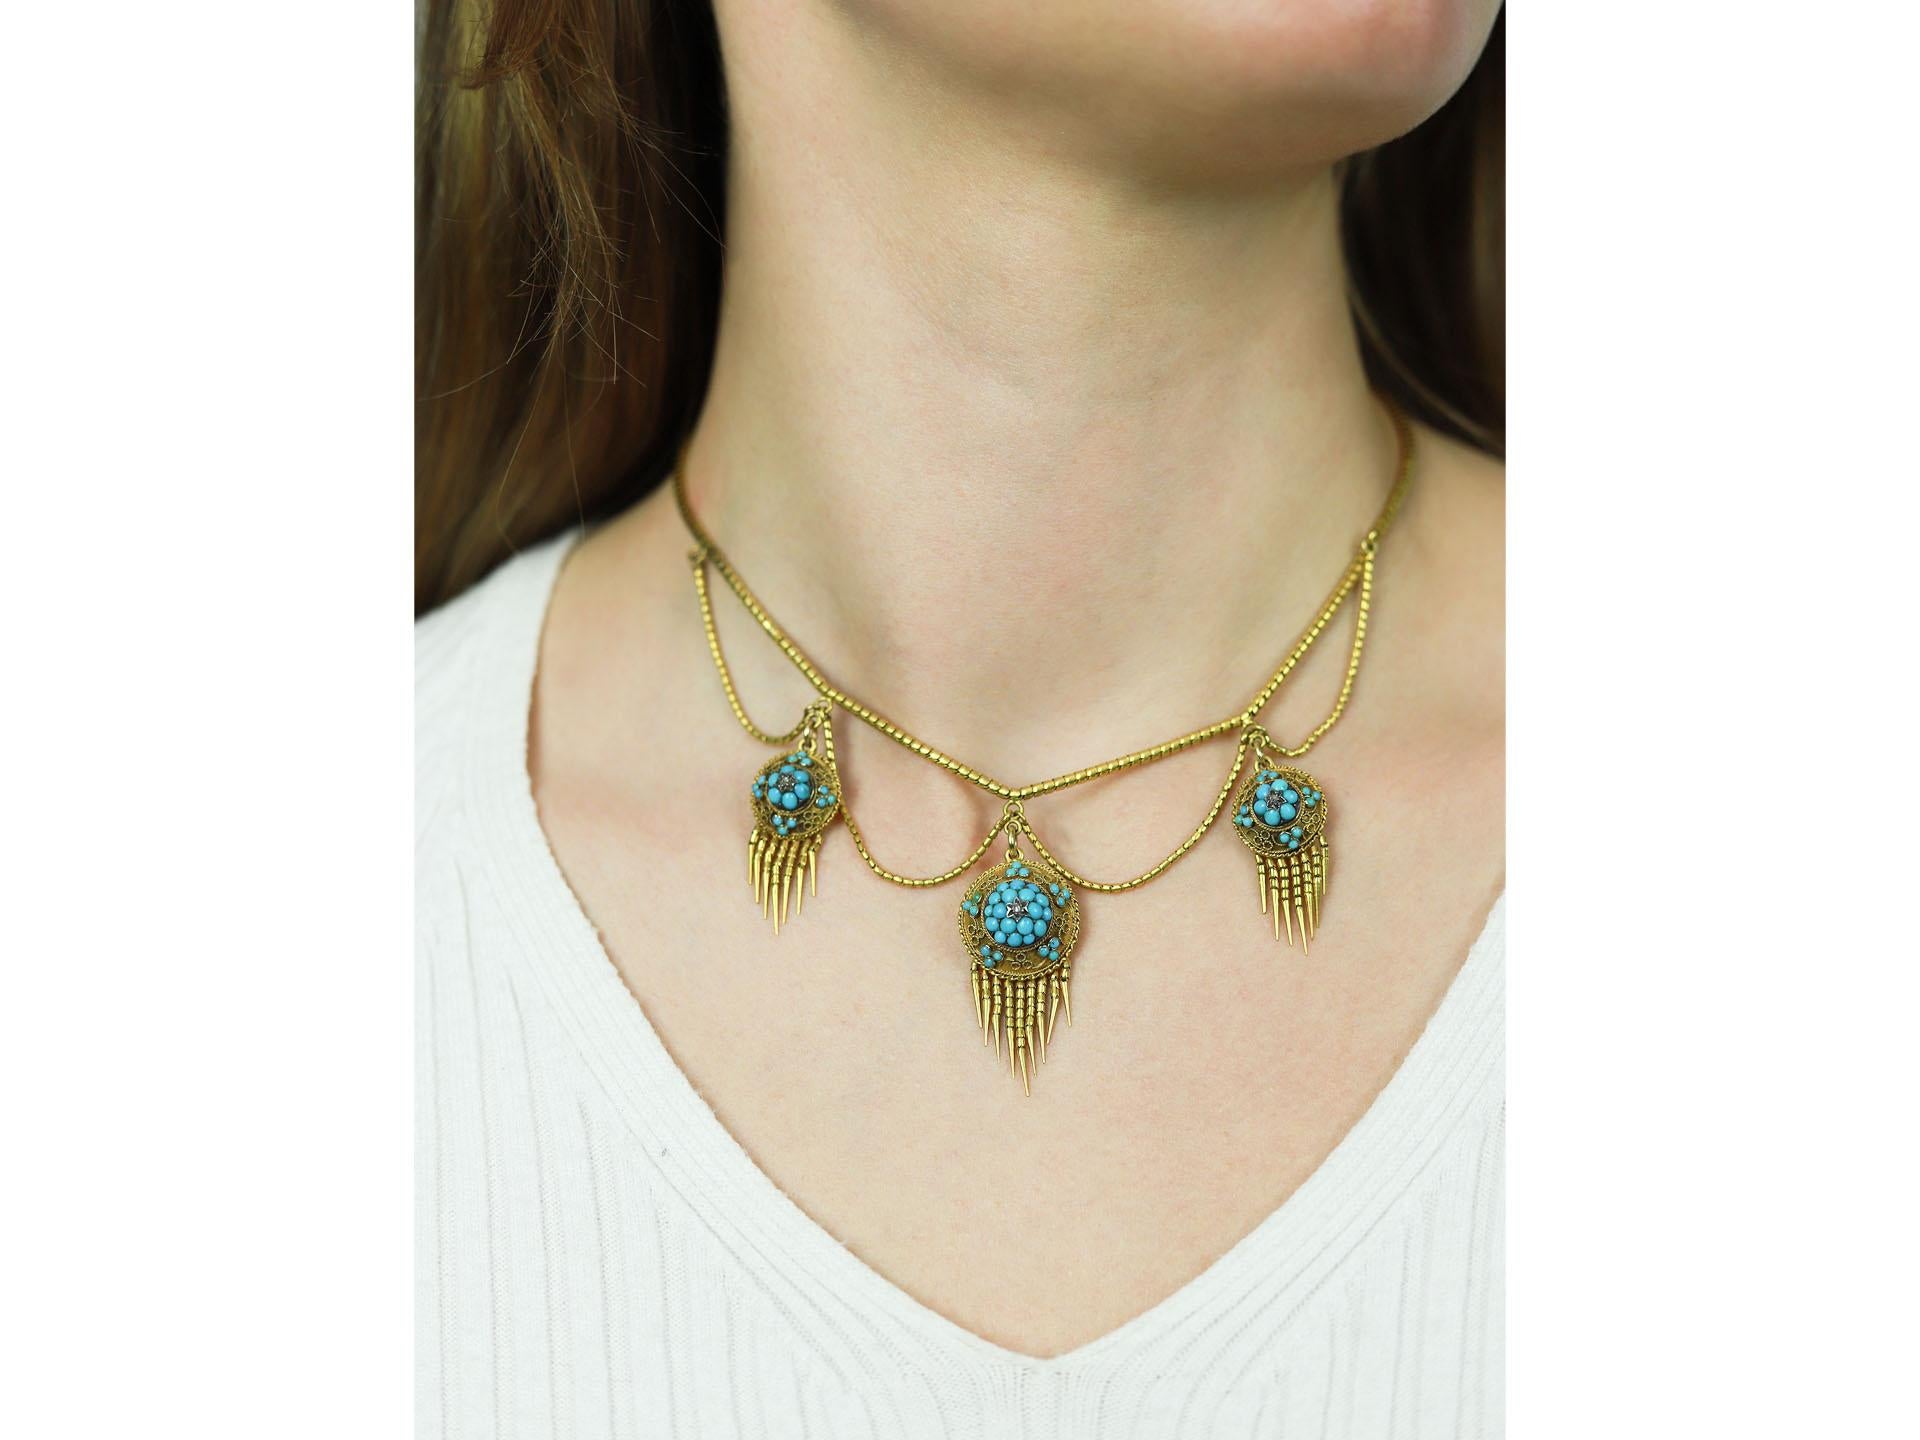 Victorian Antique turquoise and rose cut diamond necklace, circa 1870. For Sale